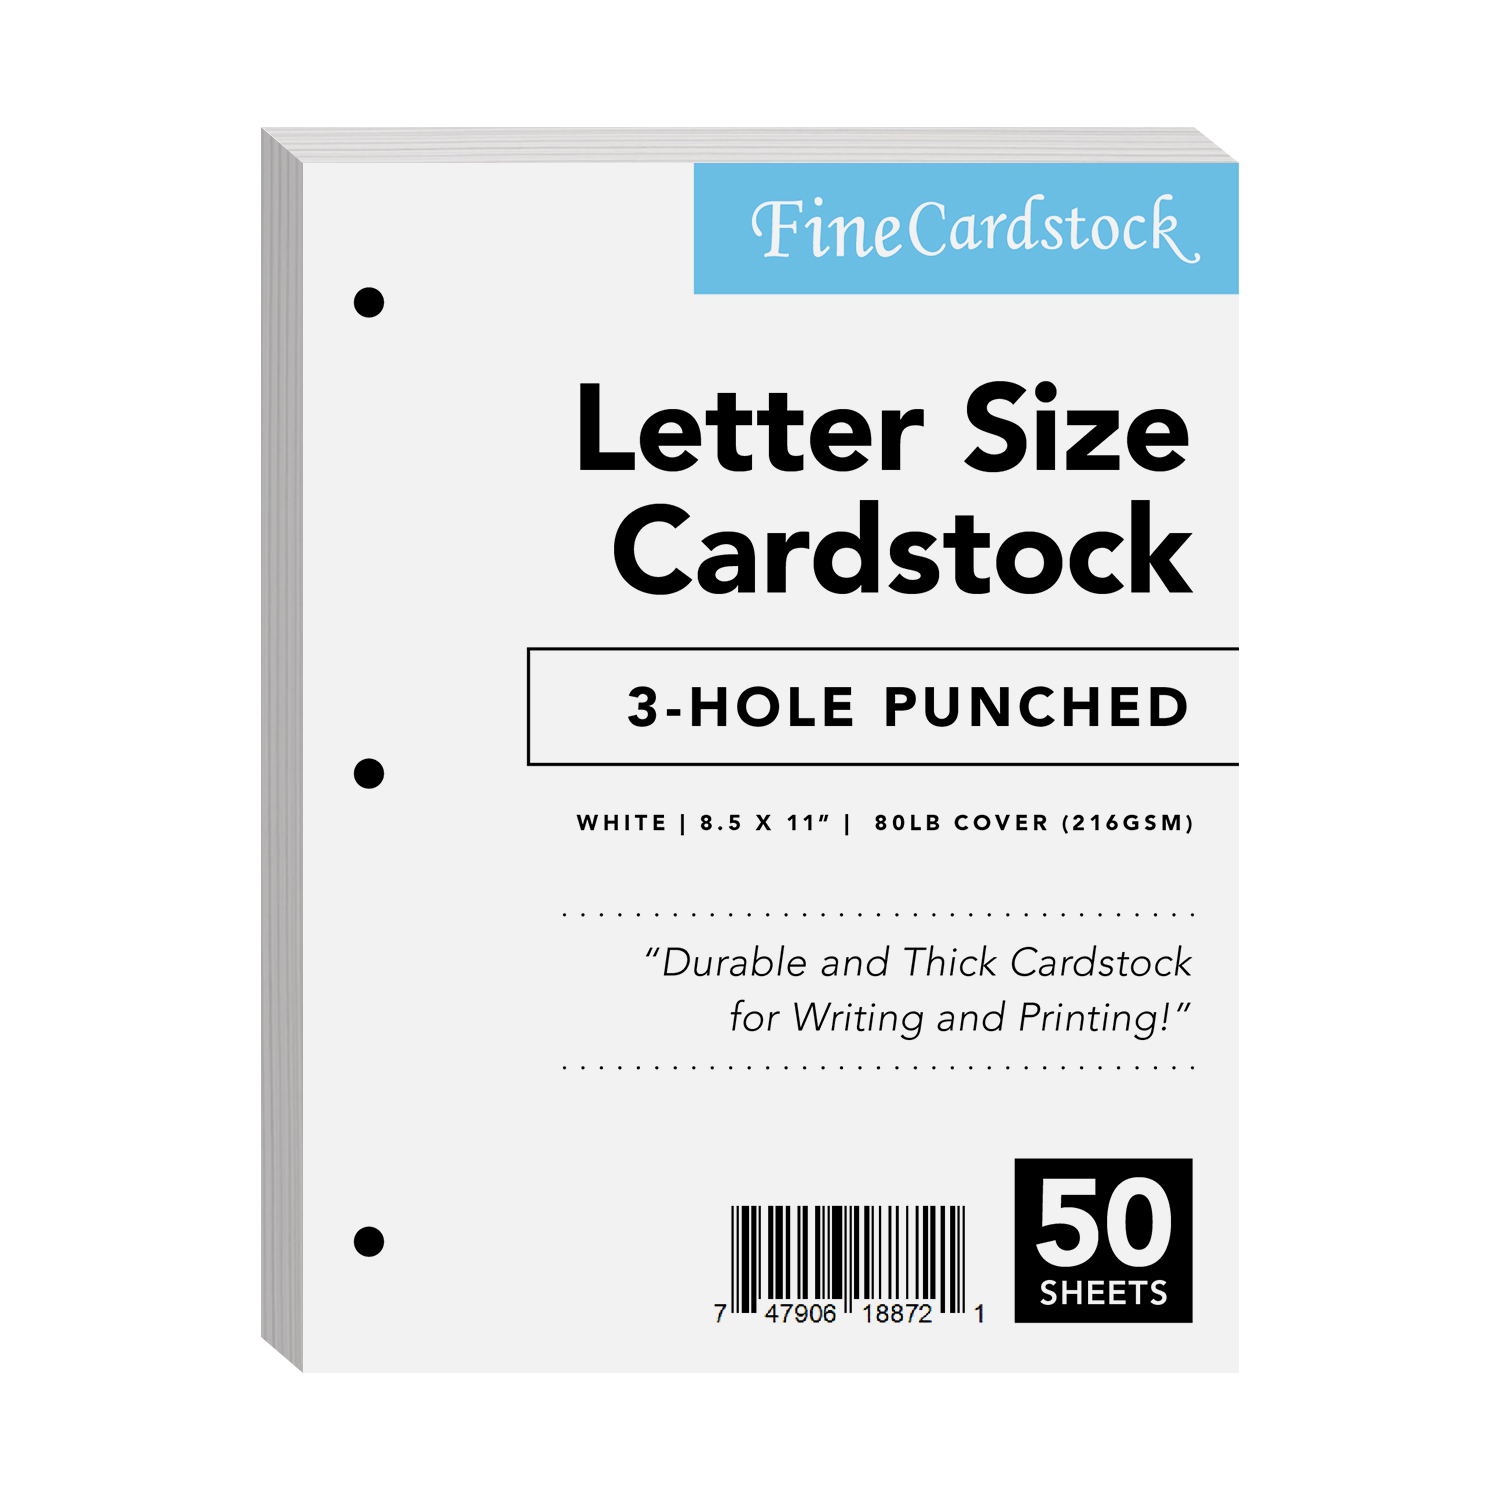 3-Hole Punch Cardstock - Bulk and Wholesale - Fine Cardstock